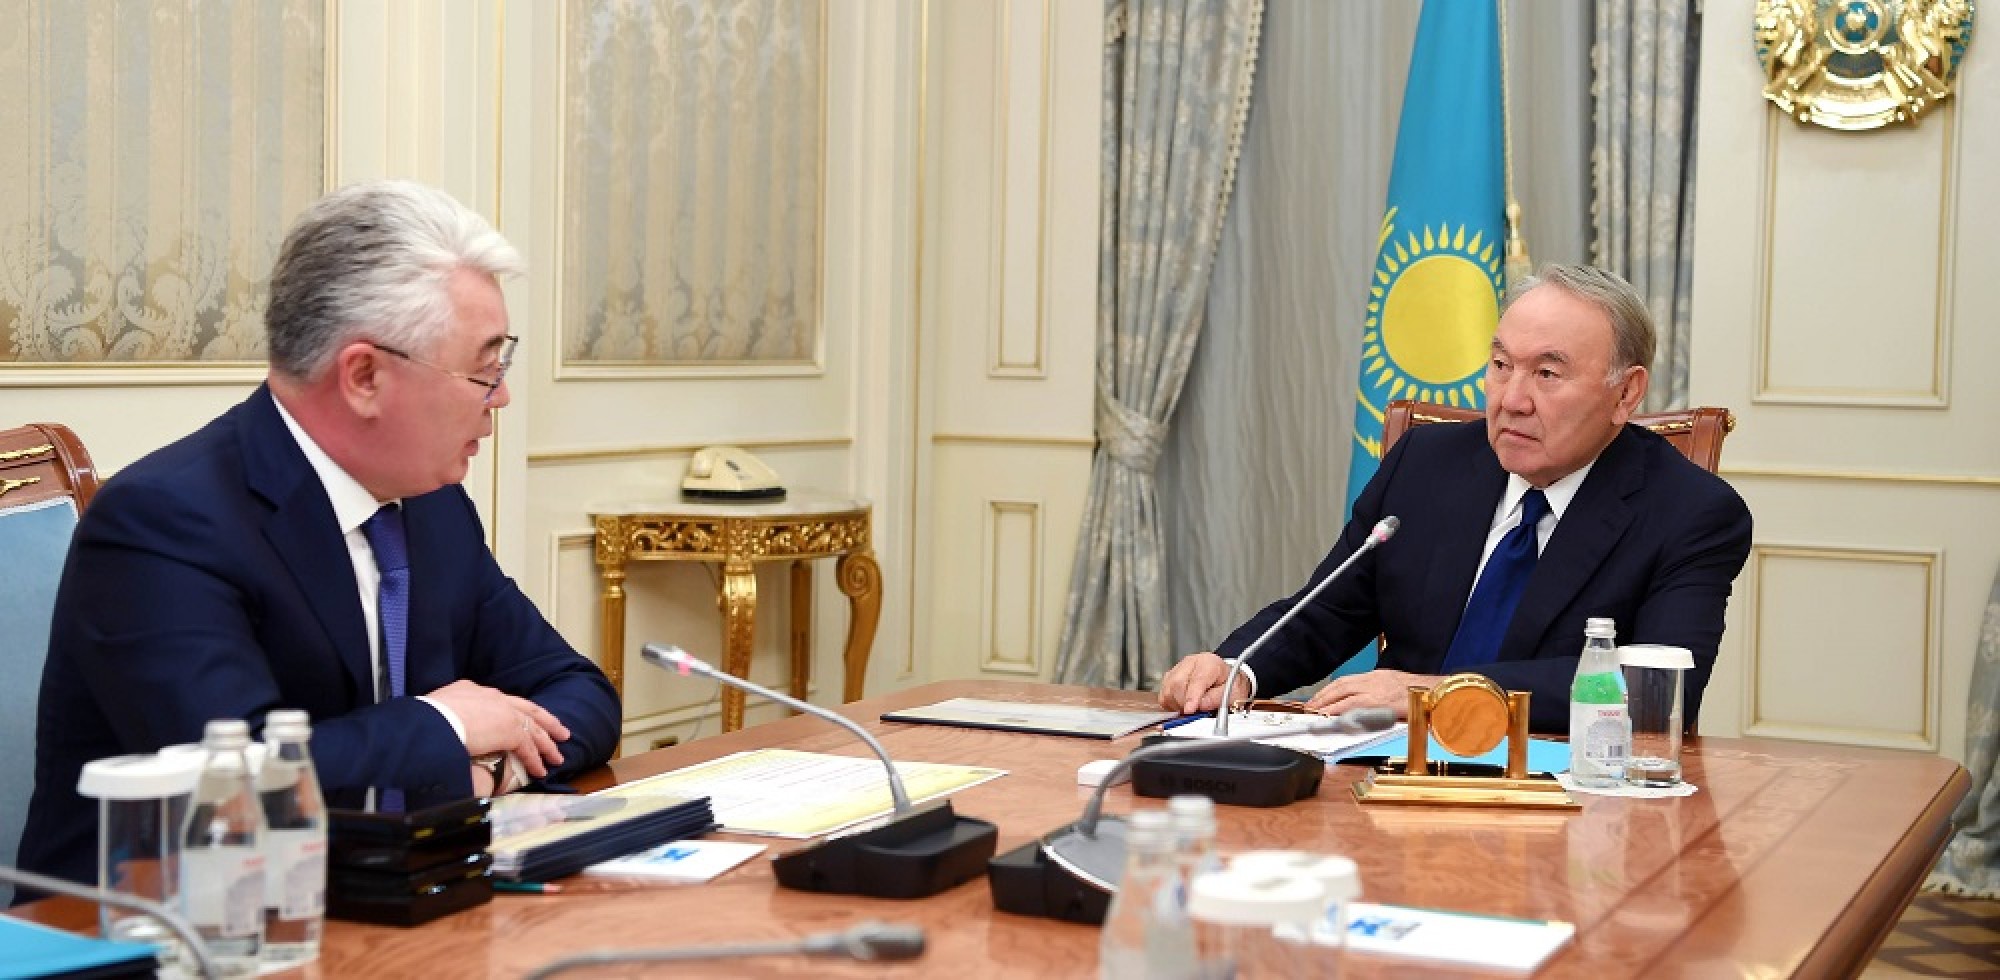 The Head of State meets with Minister of Defense and Aerospace Industry, B. Atamkulov